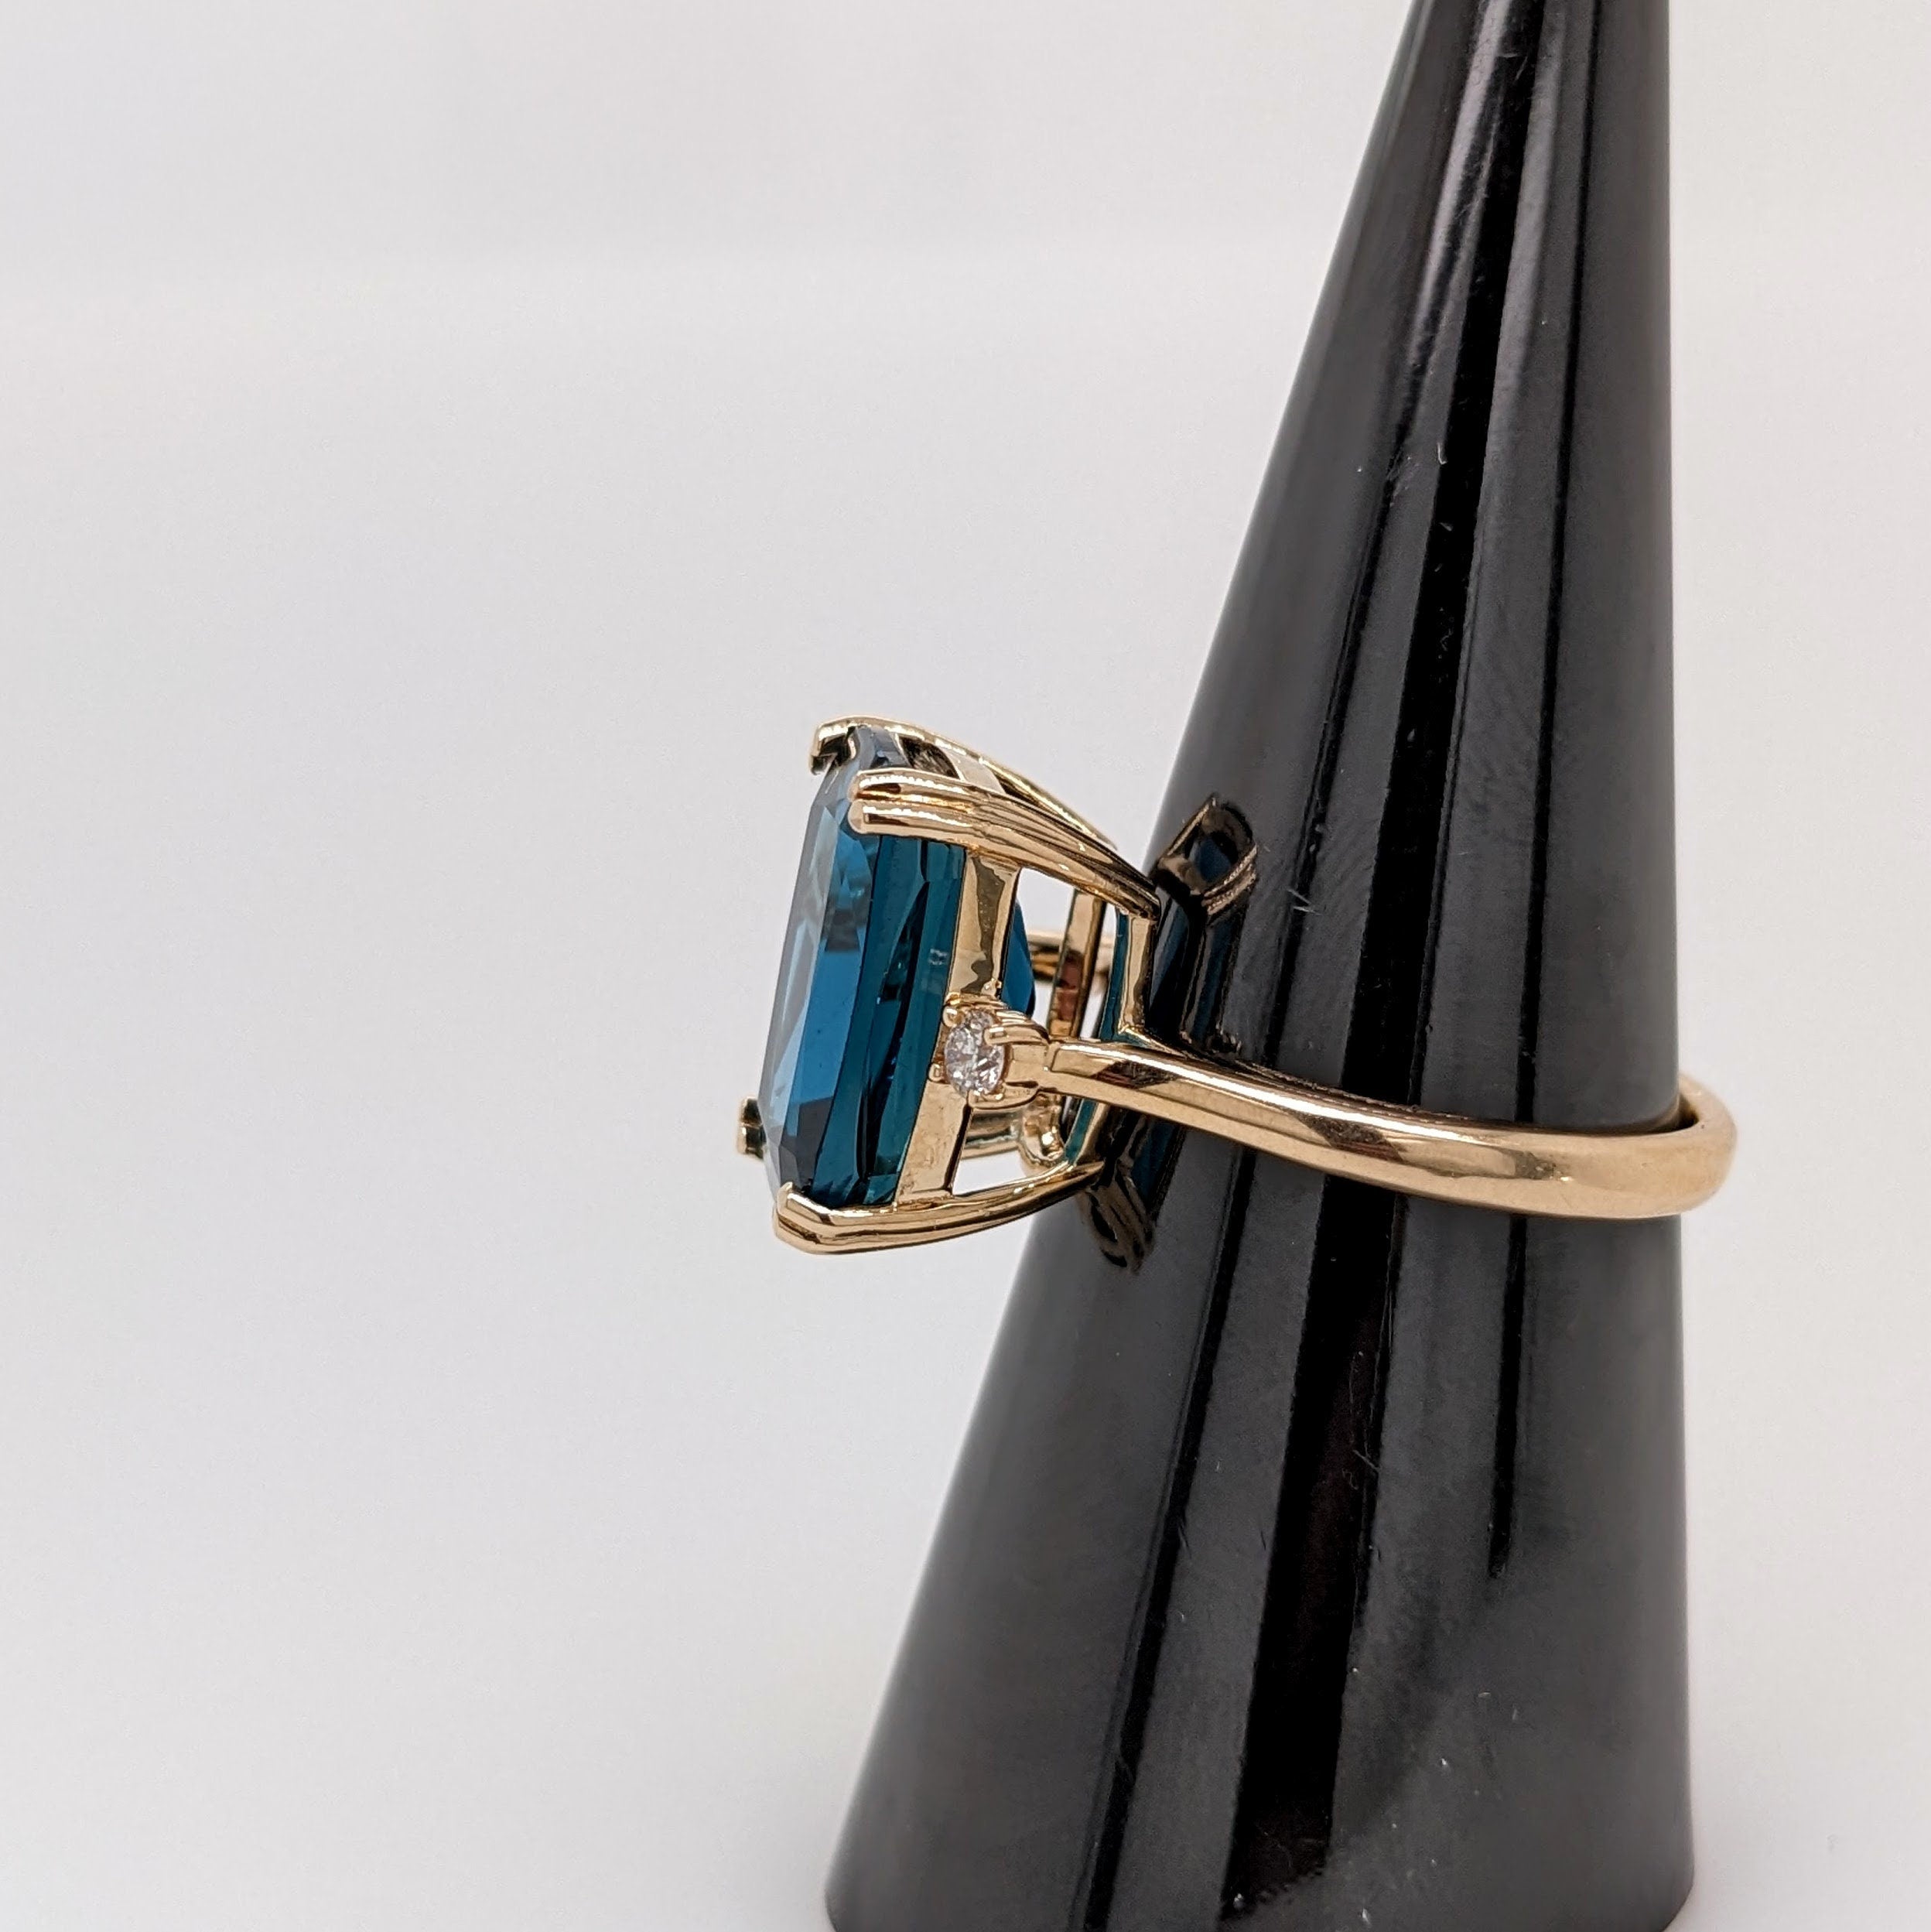 Stunning London Blue Topaz Ring in Solid 14K Yellow Gold w Diamond Accents | Cushion 14x20mm | Solitaire Topaz Ring | November Birthstone